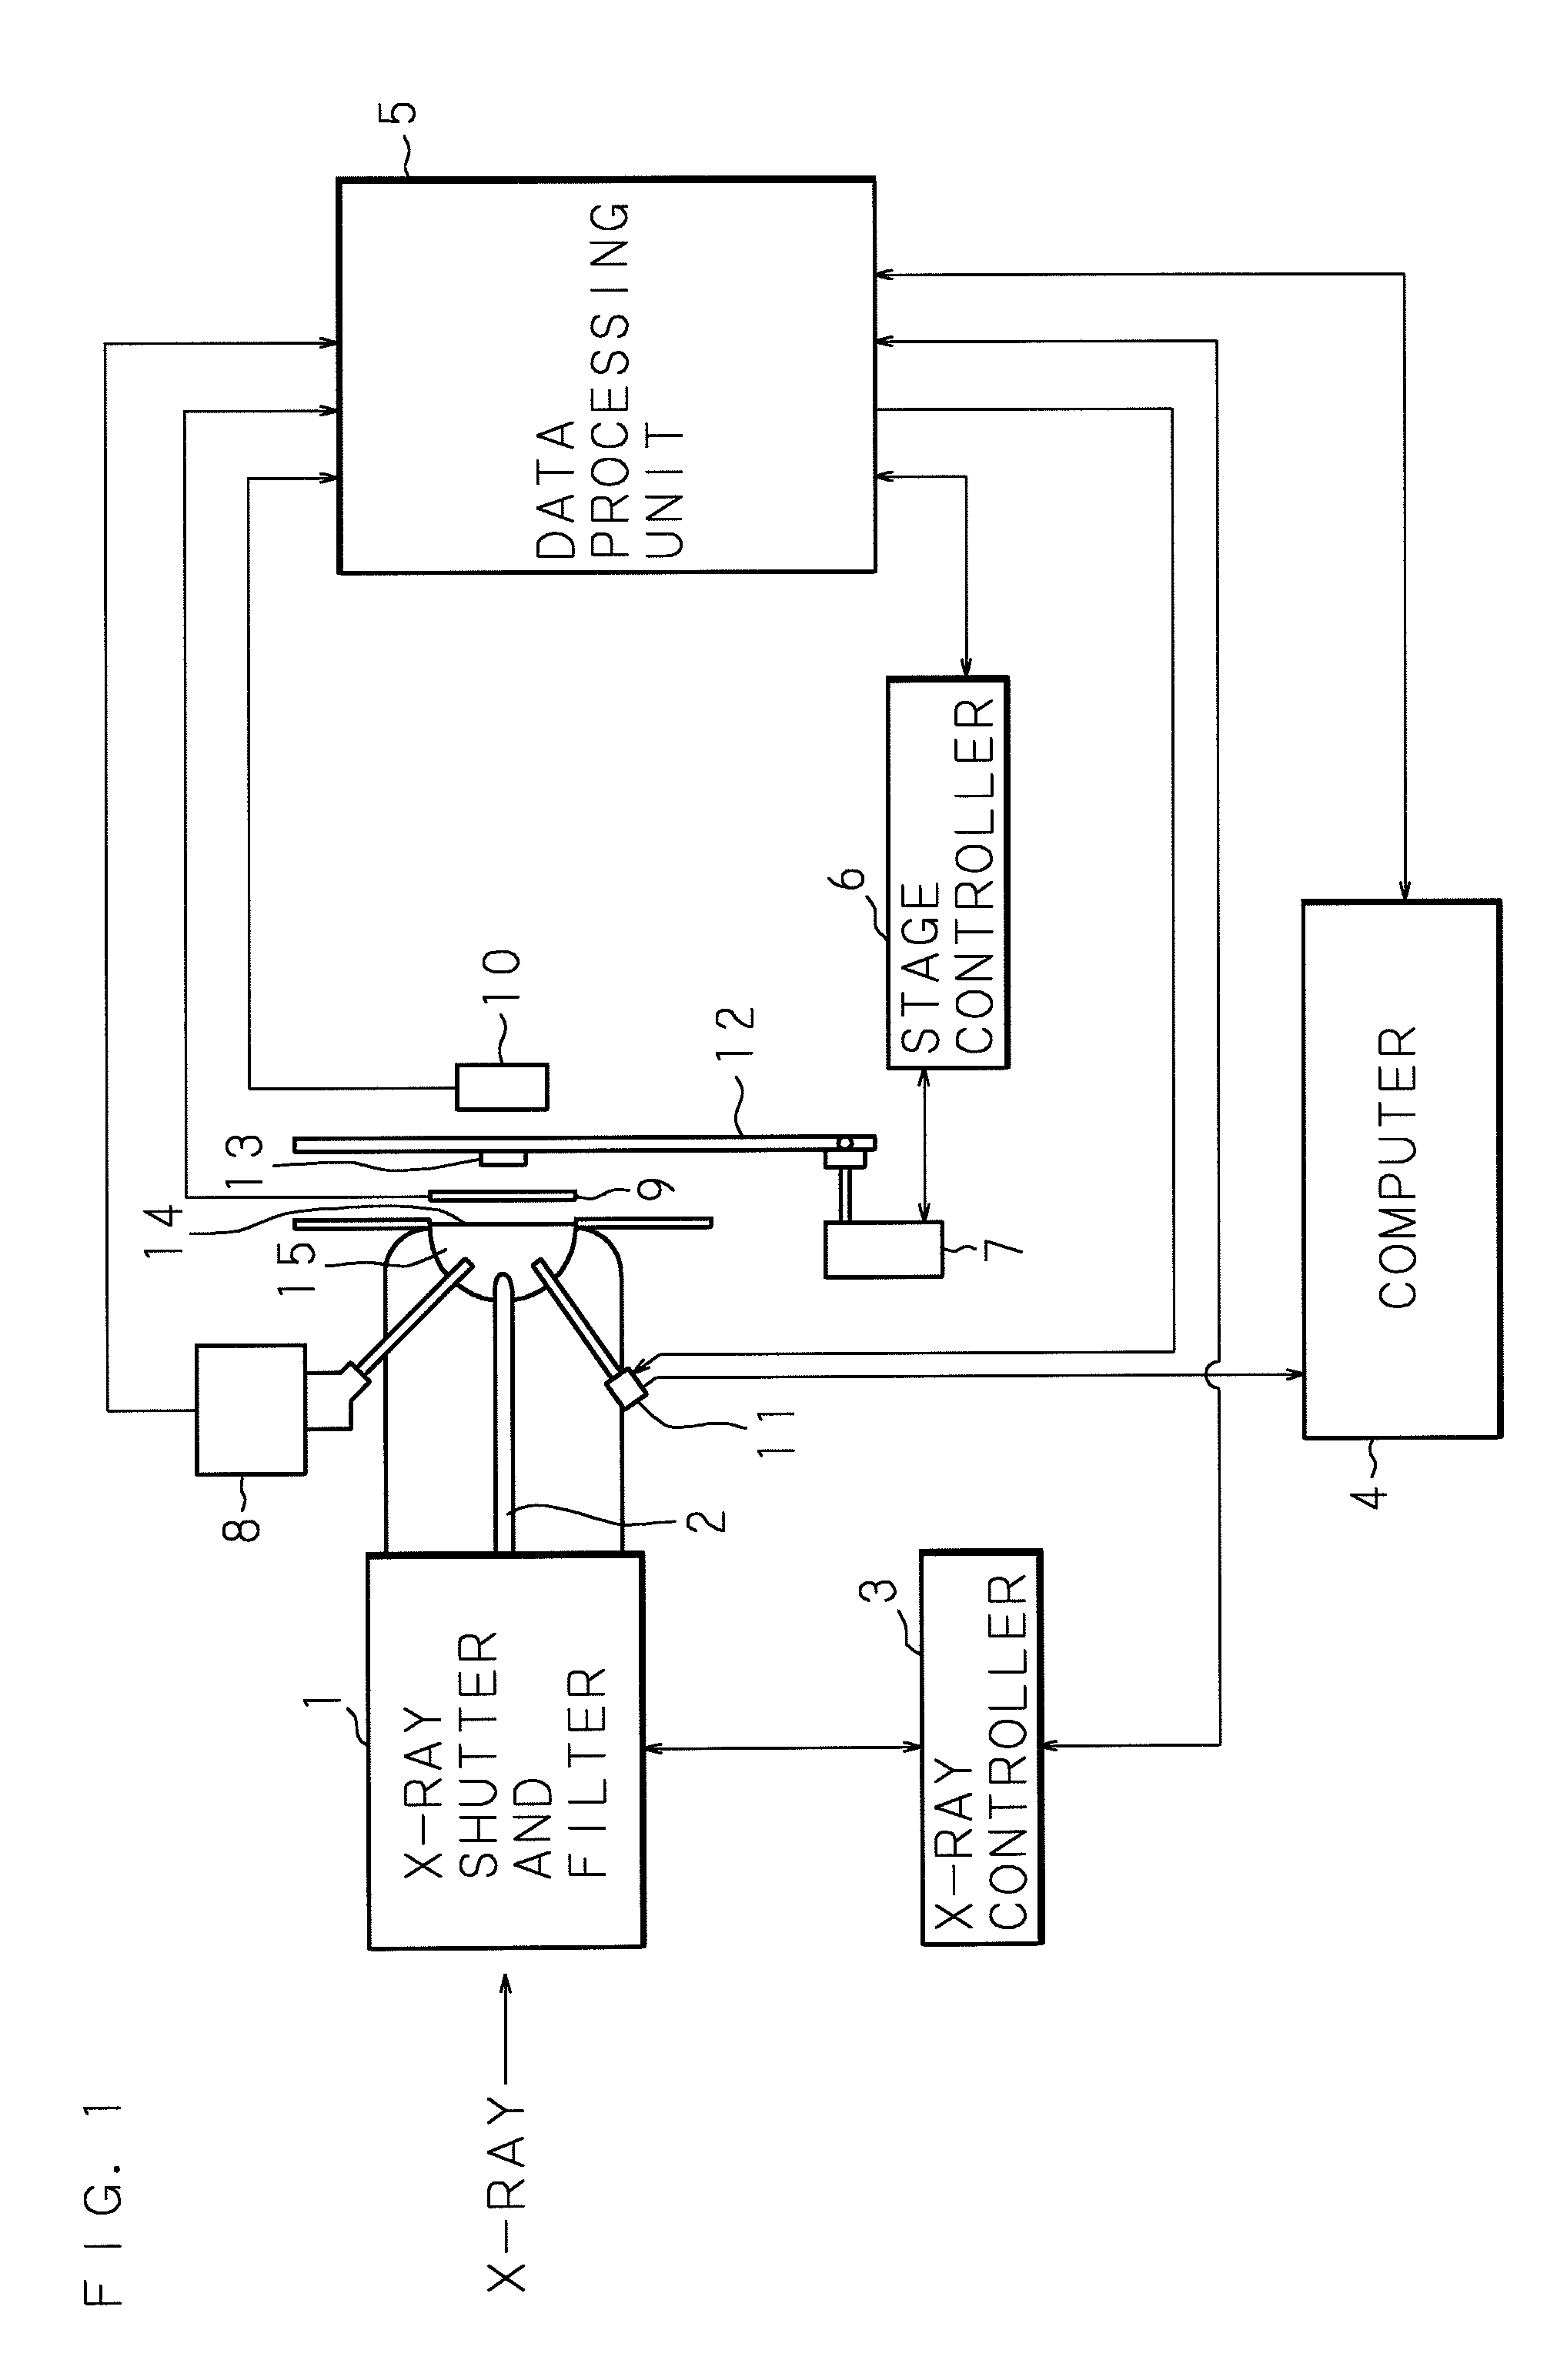 X-ray convergence element and X-ray irradiation device